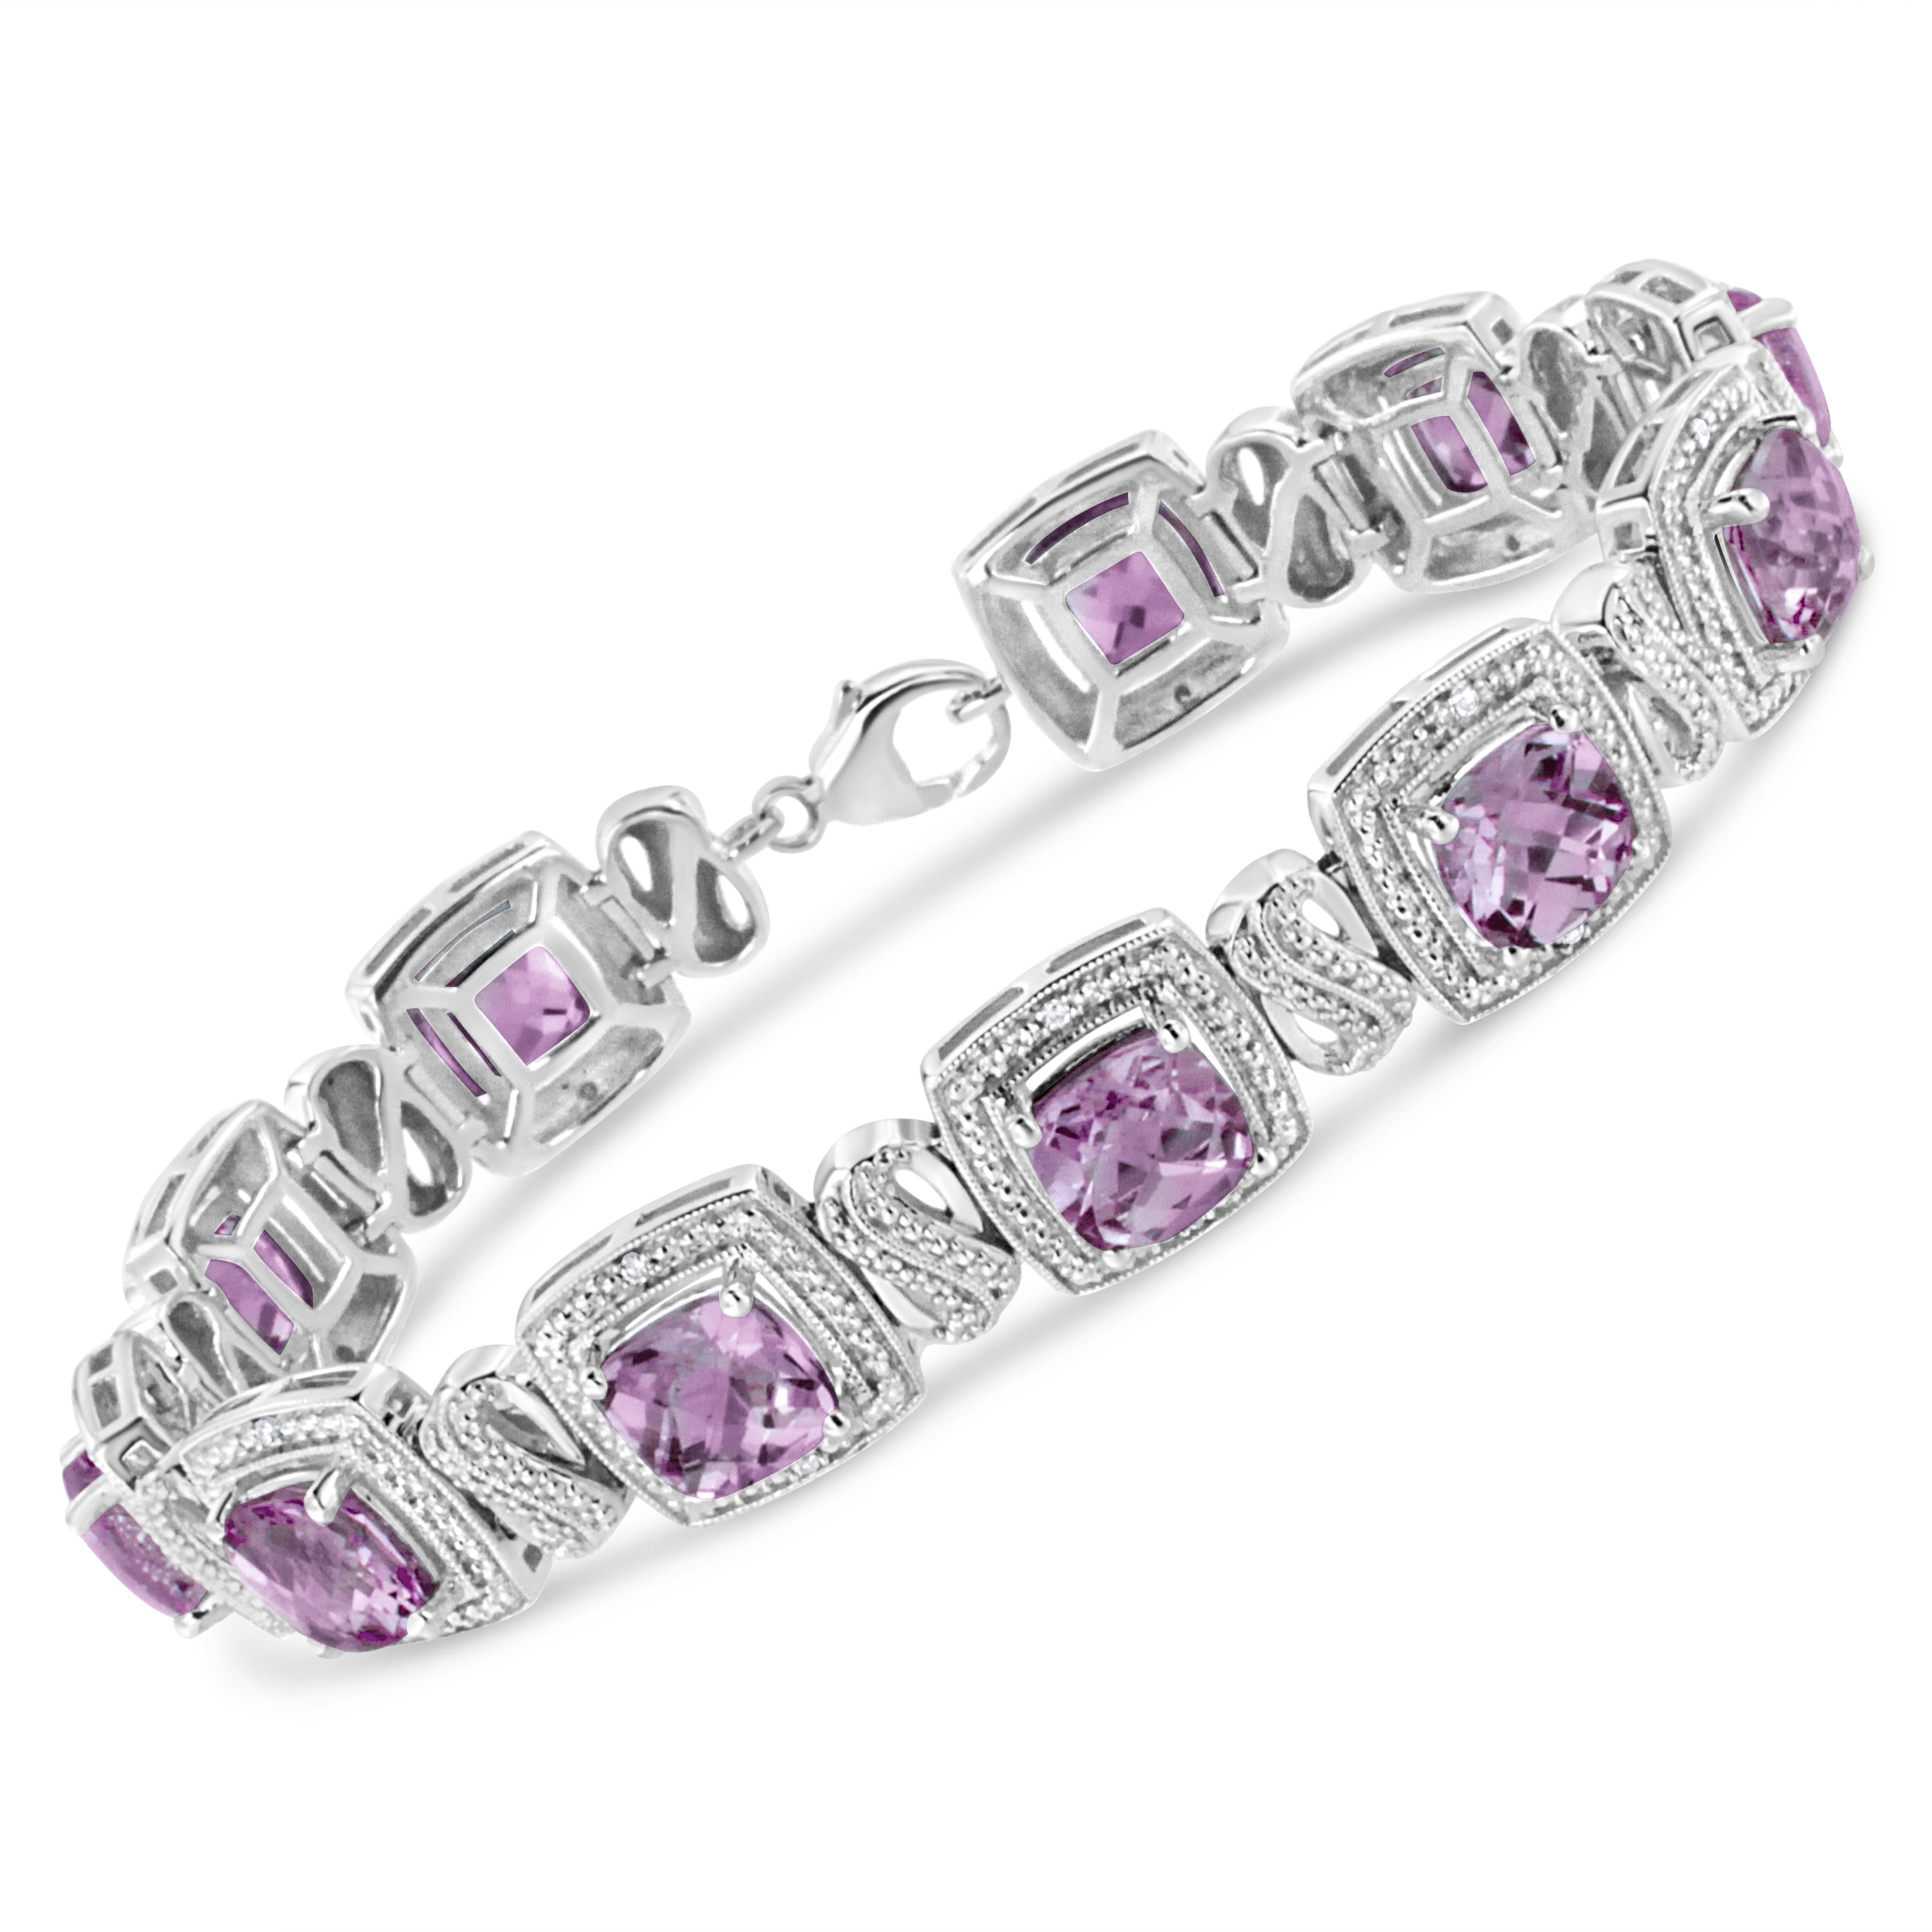 Make a glistening fest for your sweetheart's wrist with this sparkling amethyst and diamond bracelet. Styled in remarkable sterling silver this square shape bracelet is embellished with 11 alluring prong set cushion cut purple amethyst accentuated